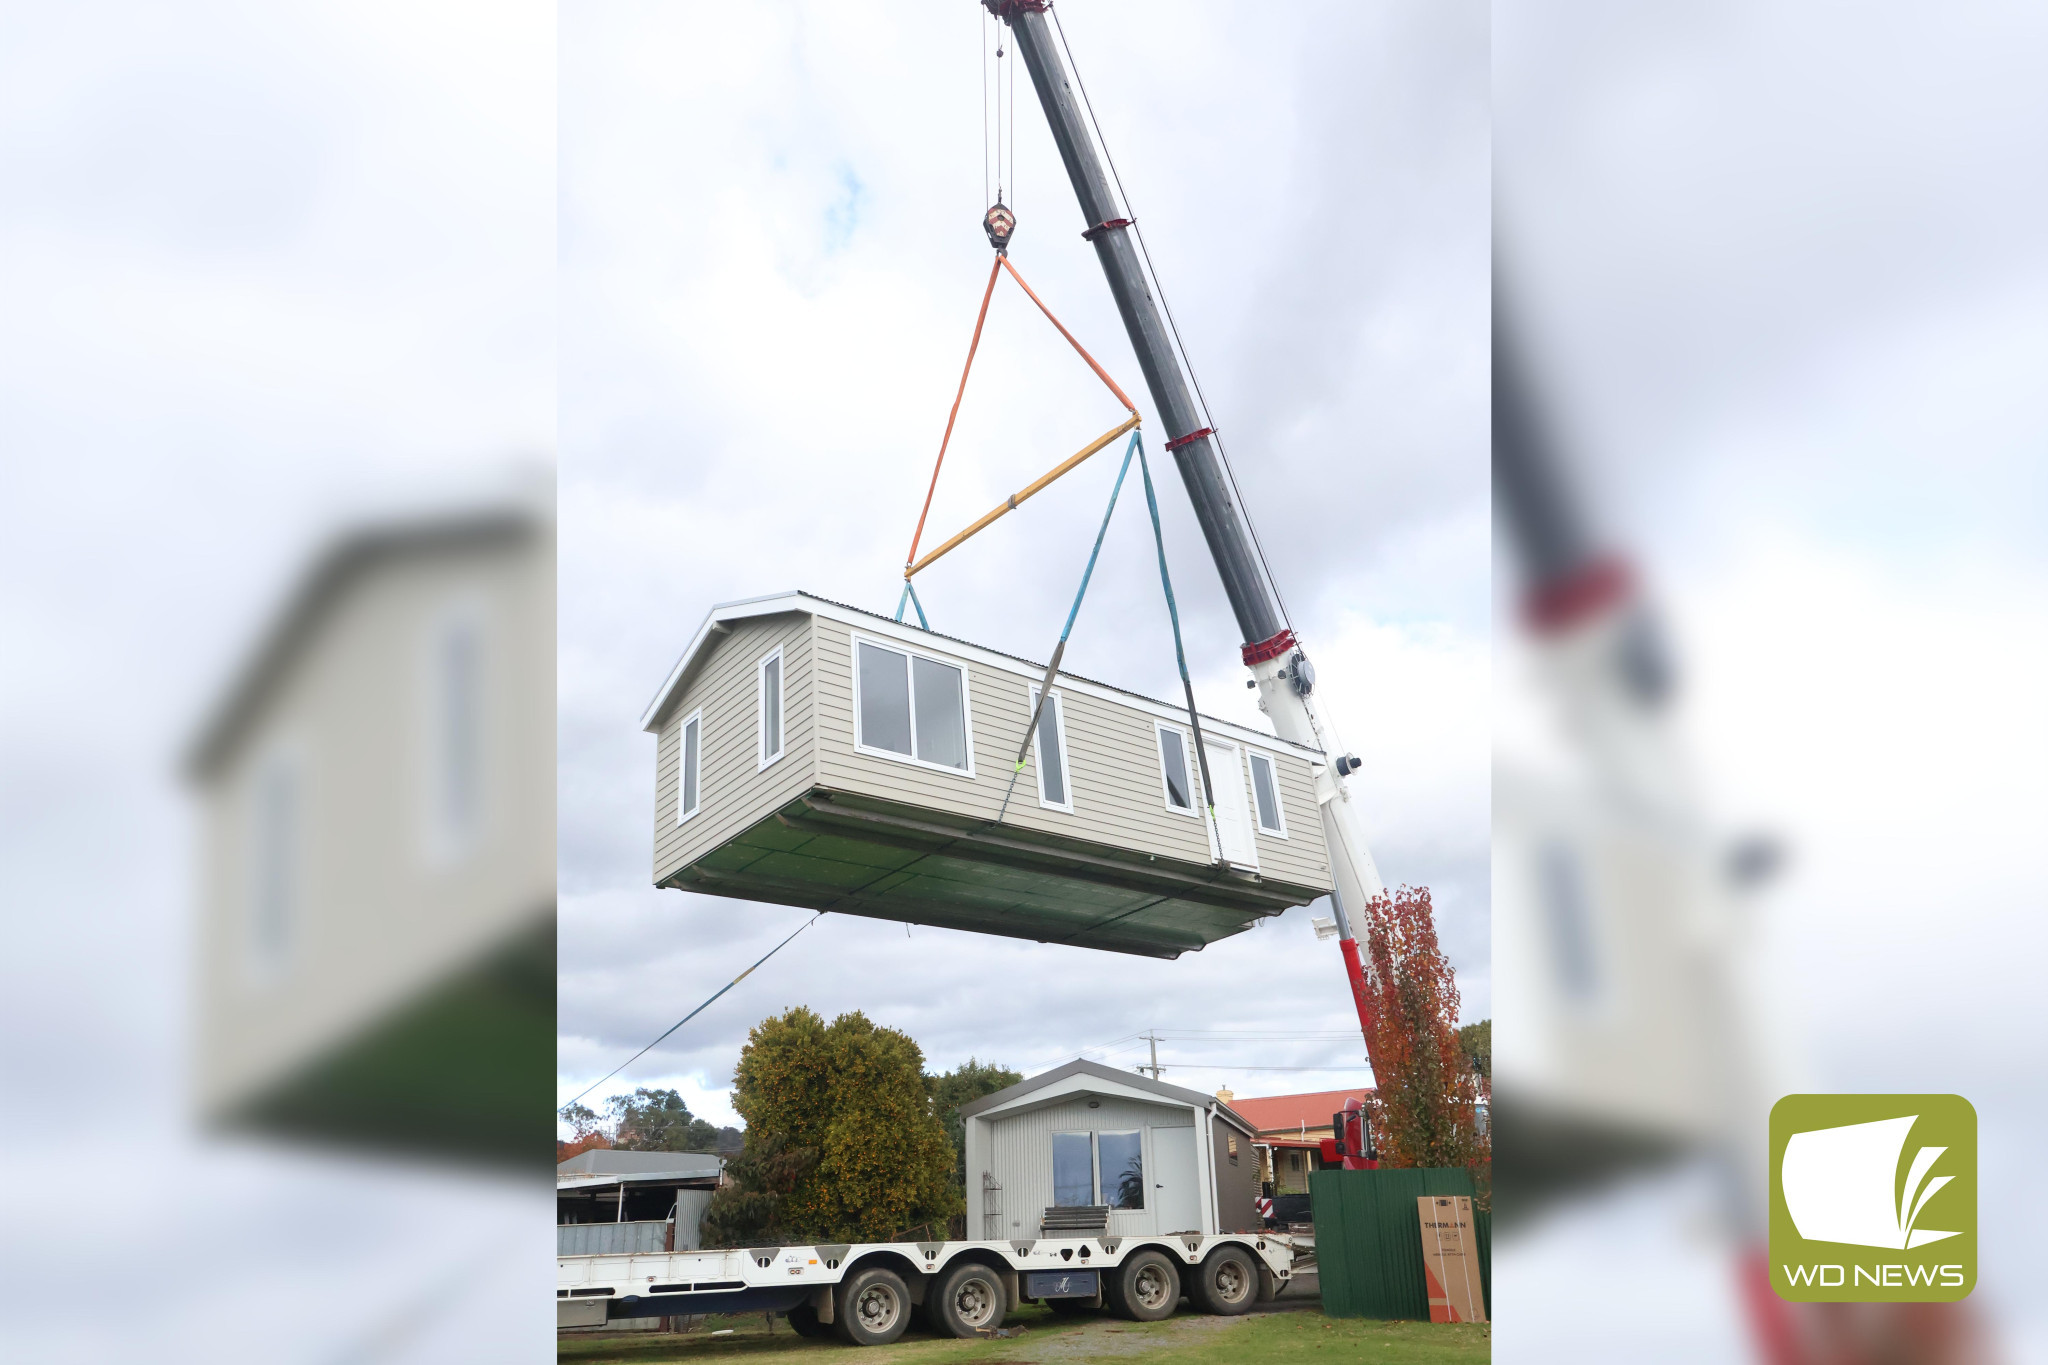 Out of the ordinary: A portable house being installed in a Fergusson Street backyard caught the attention of many Spring Street residents.